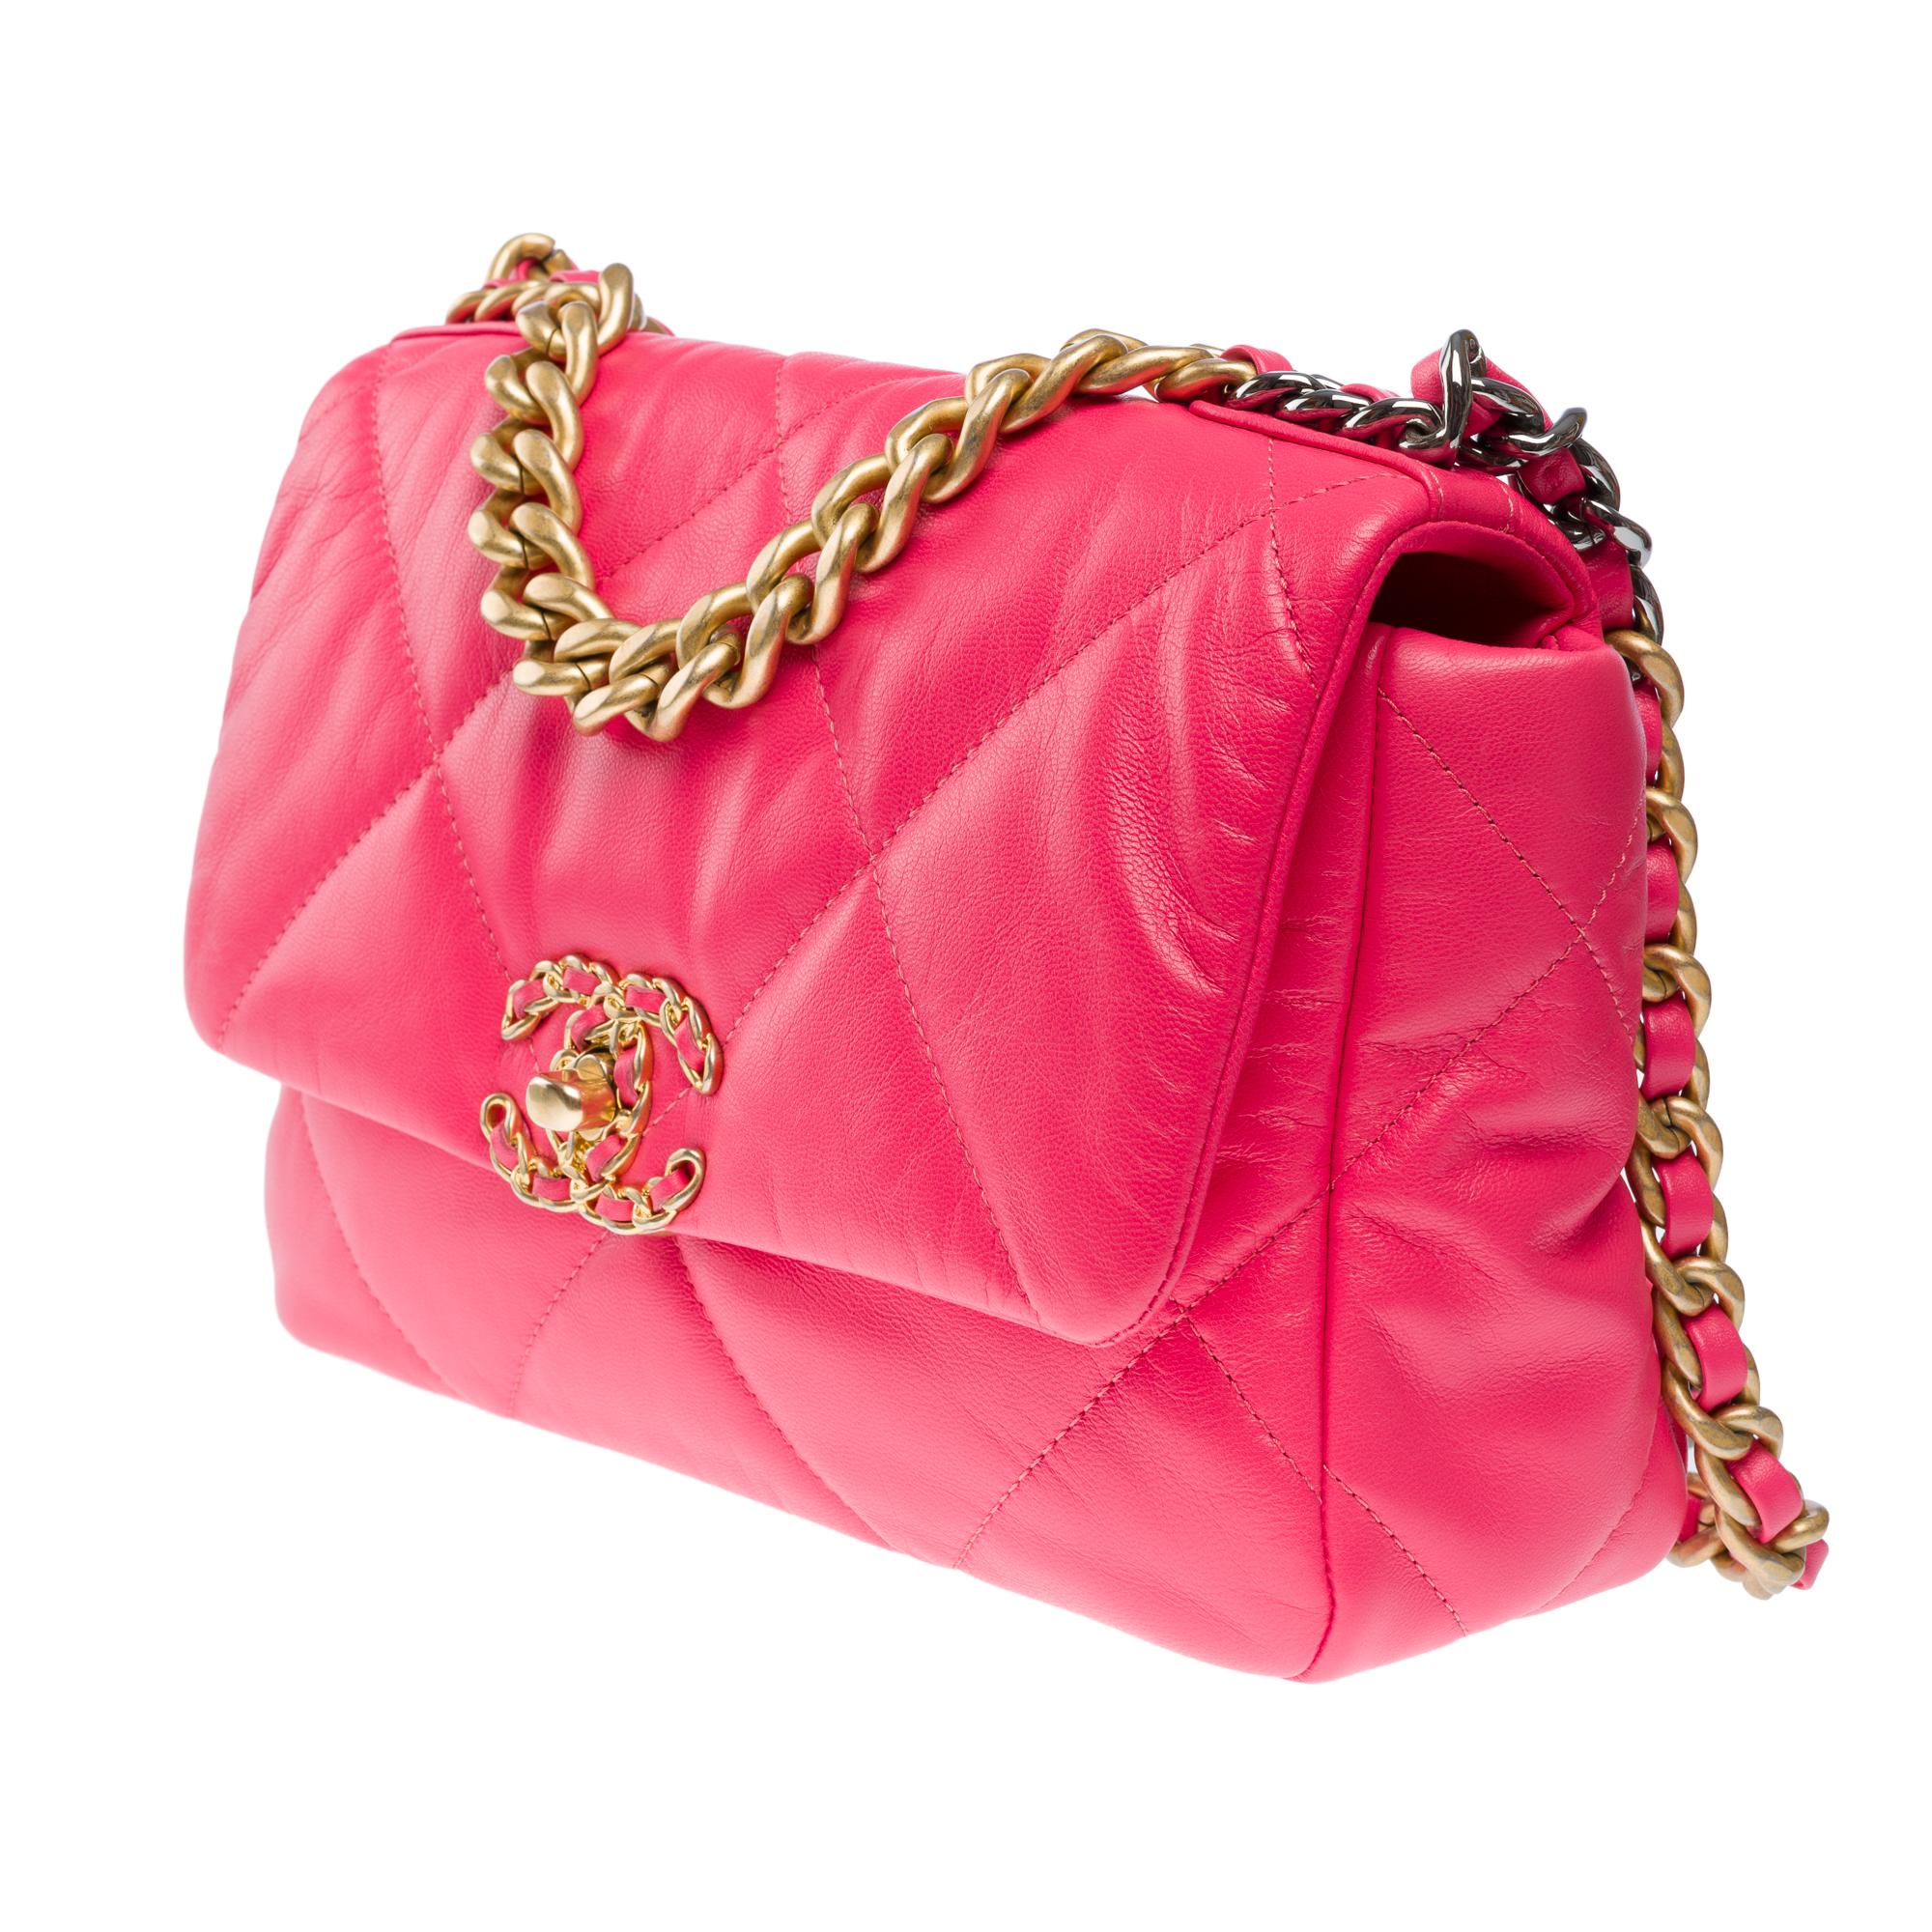 Stunning Chanel 19 shoulder bag in Pink quilted leather , Matt gold and SHW 2